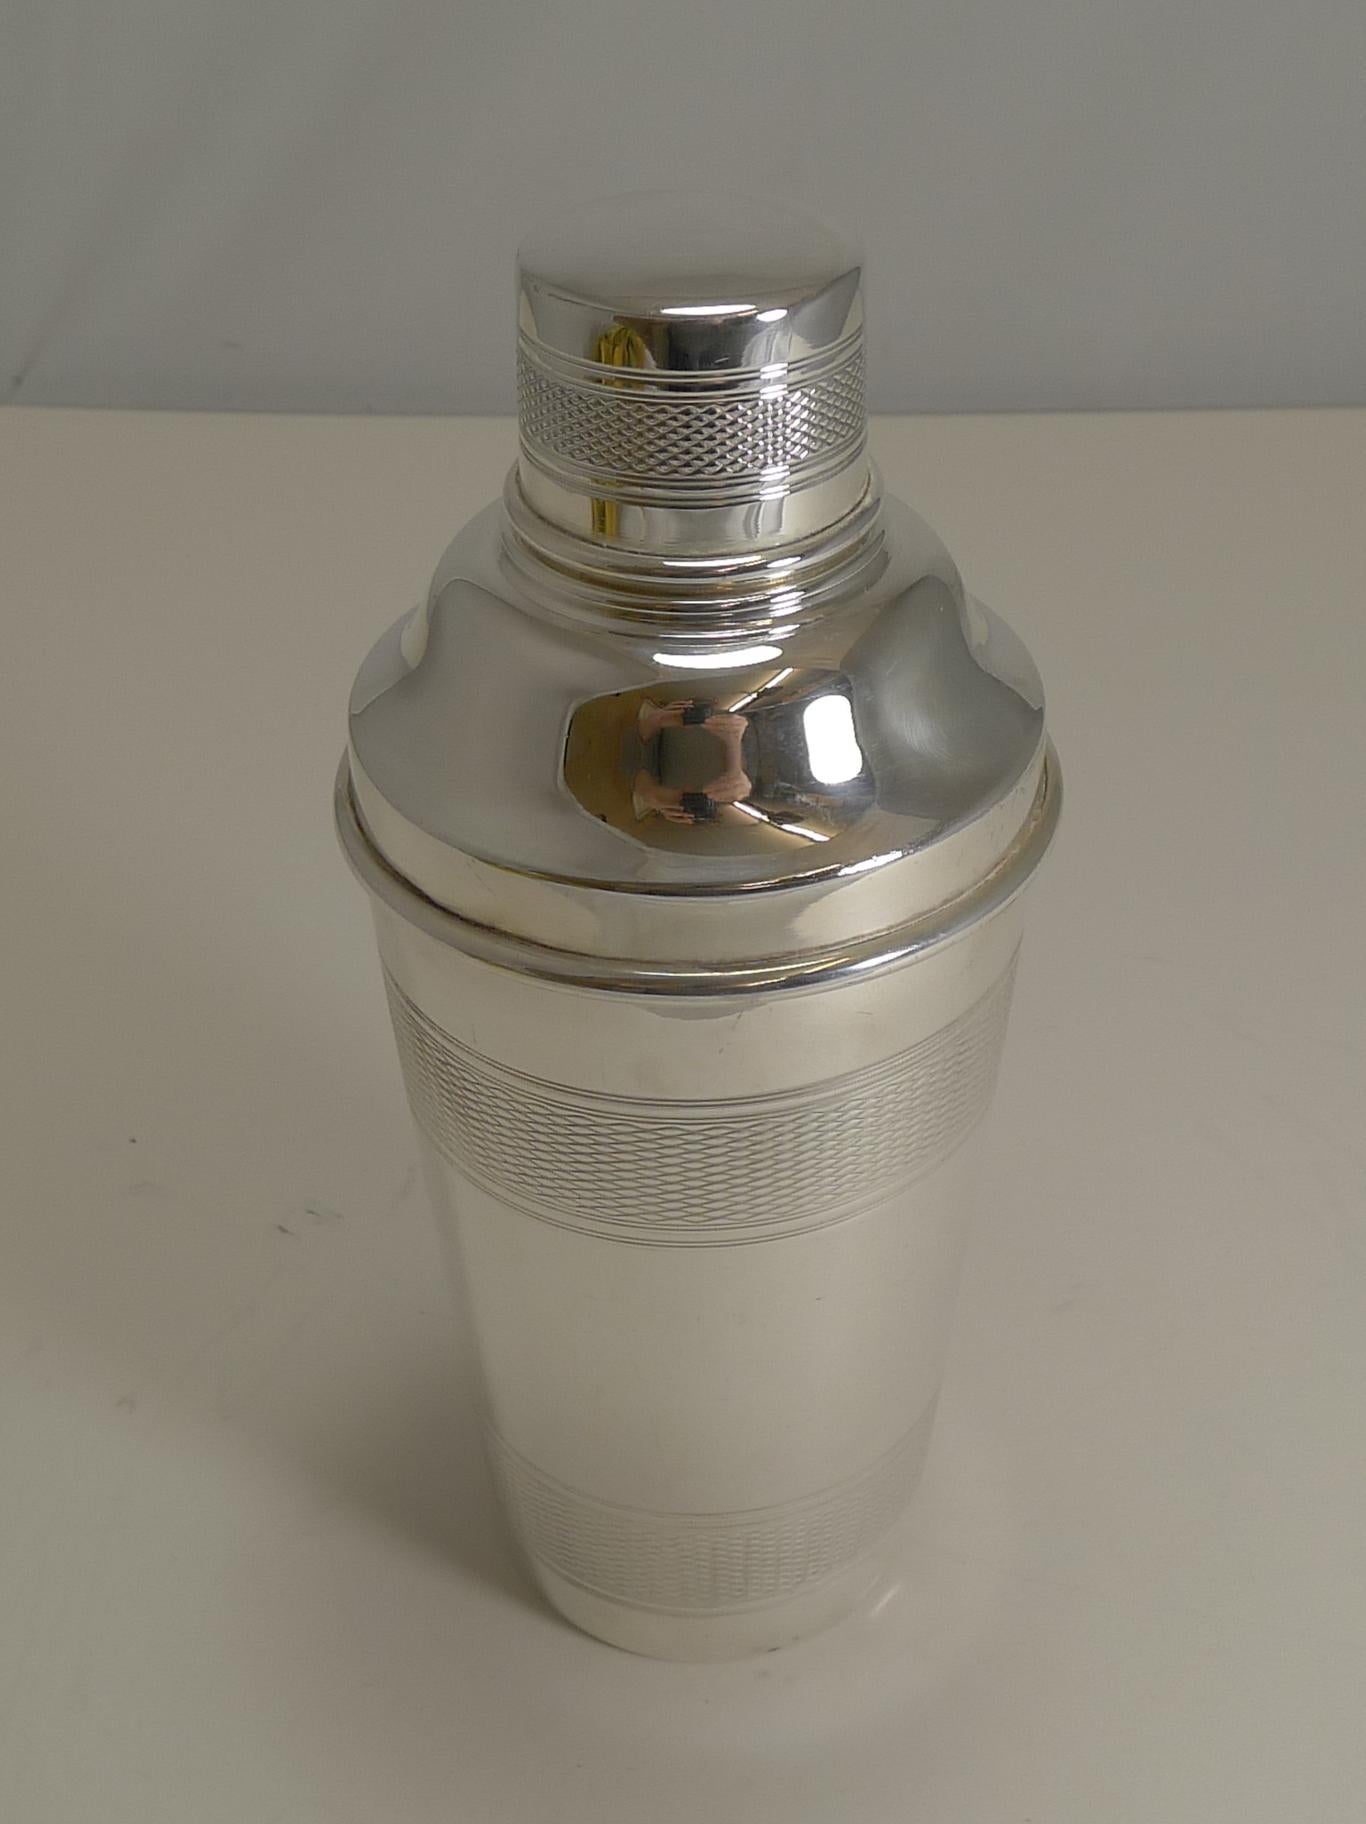 A handsome vintage silver plated cocktail shaker with engine-turned decoration.

The underside is signed by the silversmith P.H. Vogel and Co., and is marked 